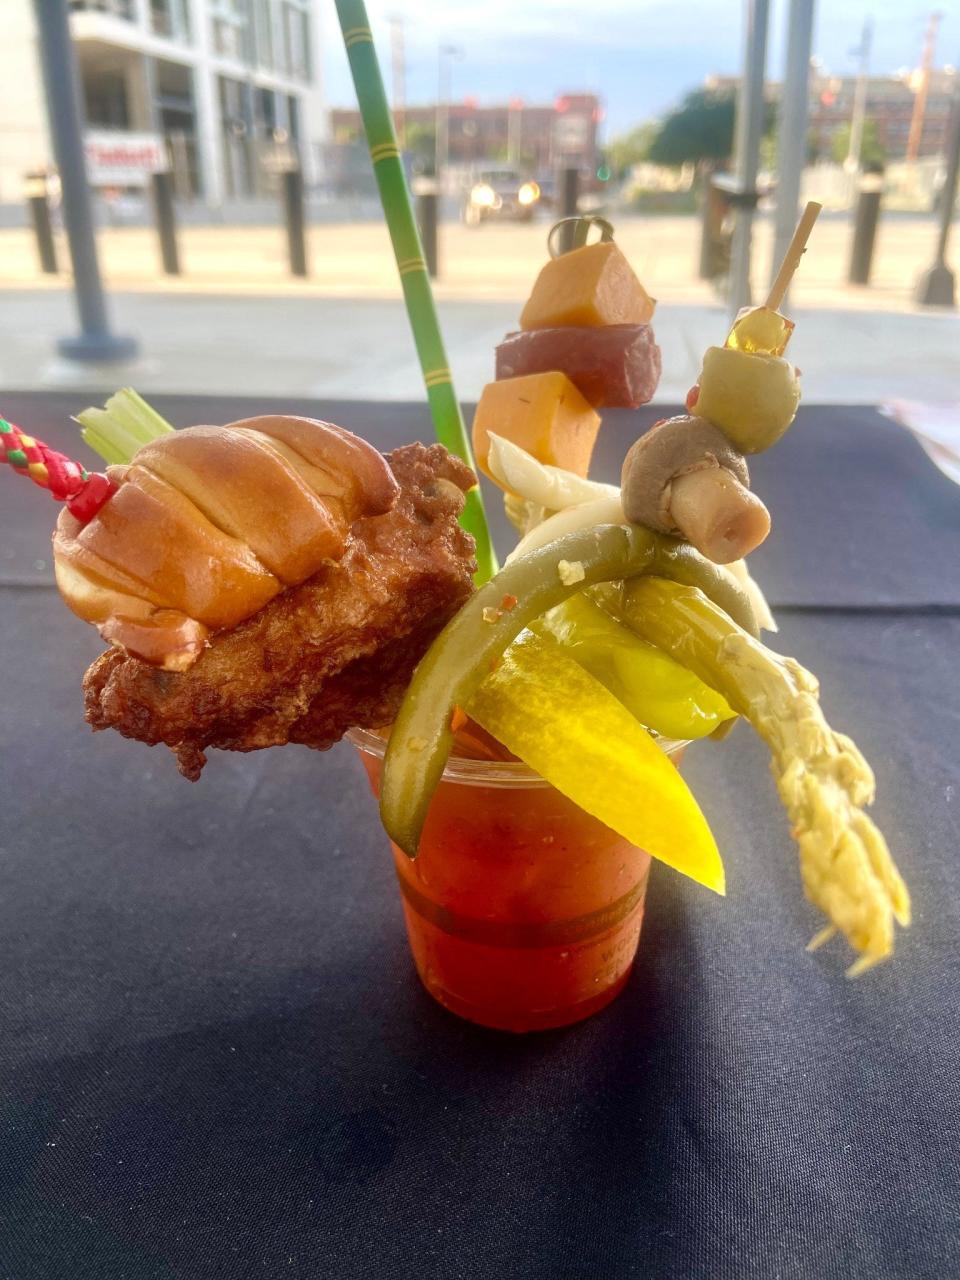 This smaller version of the garnish used on Smashed on the Rocks' regular loaded bloody mary won the Best Garnish category at the 2022 Bloody Mary Festival held Aug. 20 in Milwaukee. The Algoma saloon's bloody mary also won for Best Original Recipe and the People's Choice award.